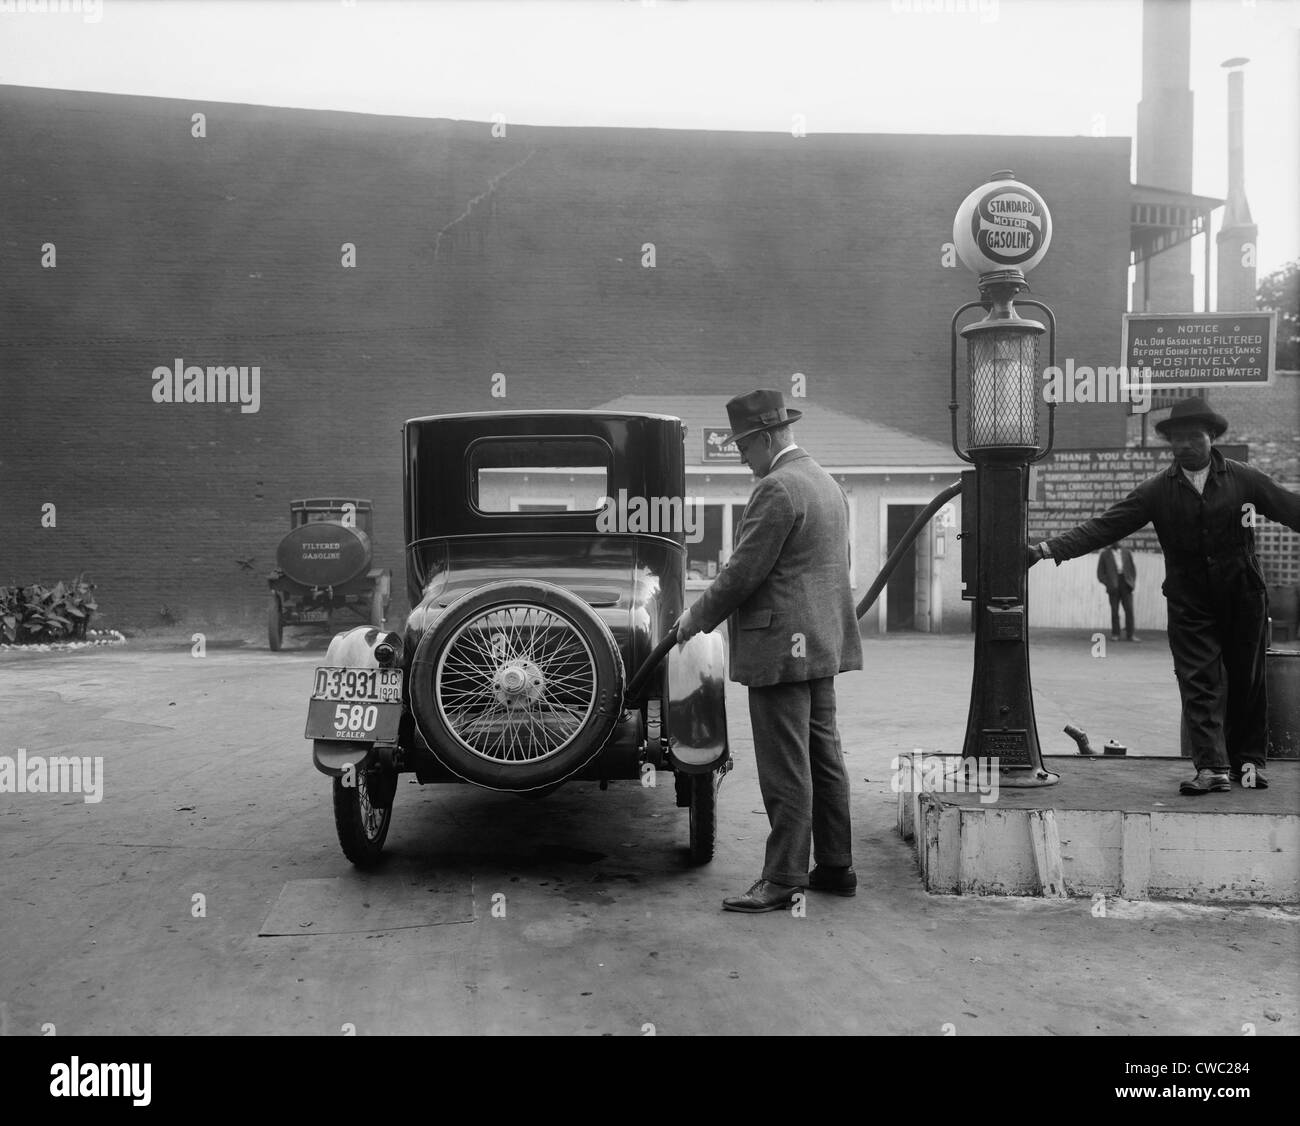 Mobile Gas Station / Pump at Store Fort Hunter Historic Photo Print NY -1941 